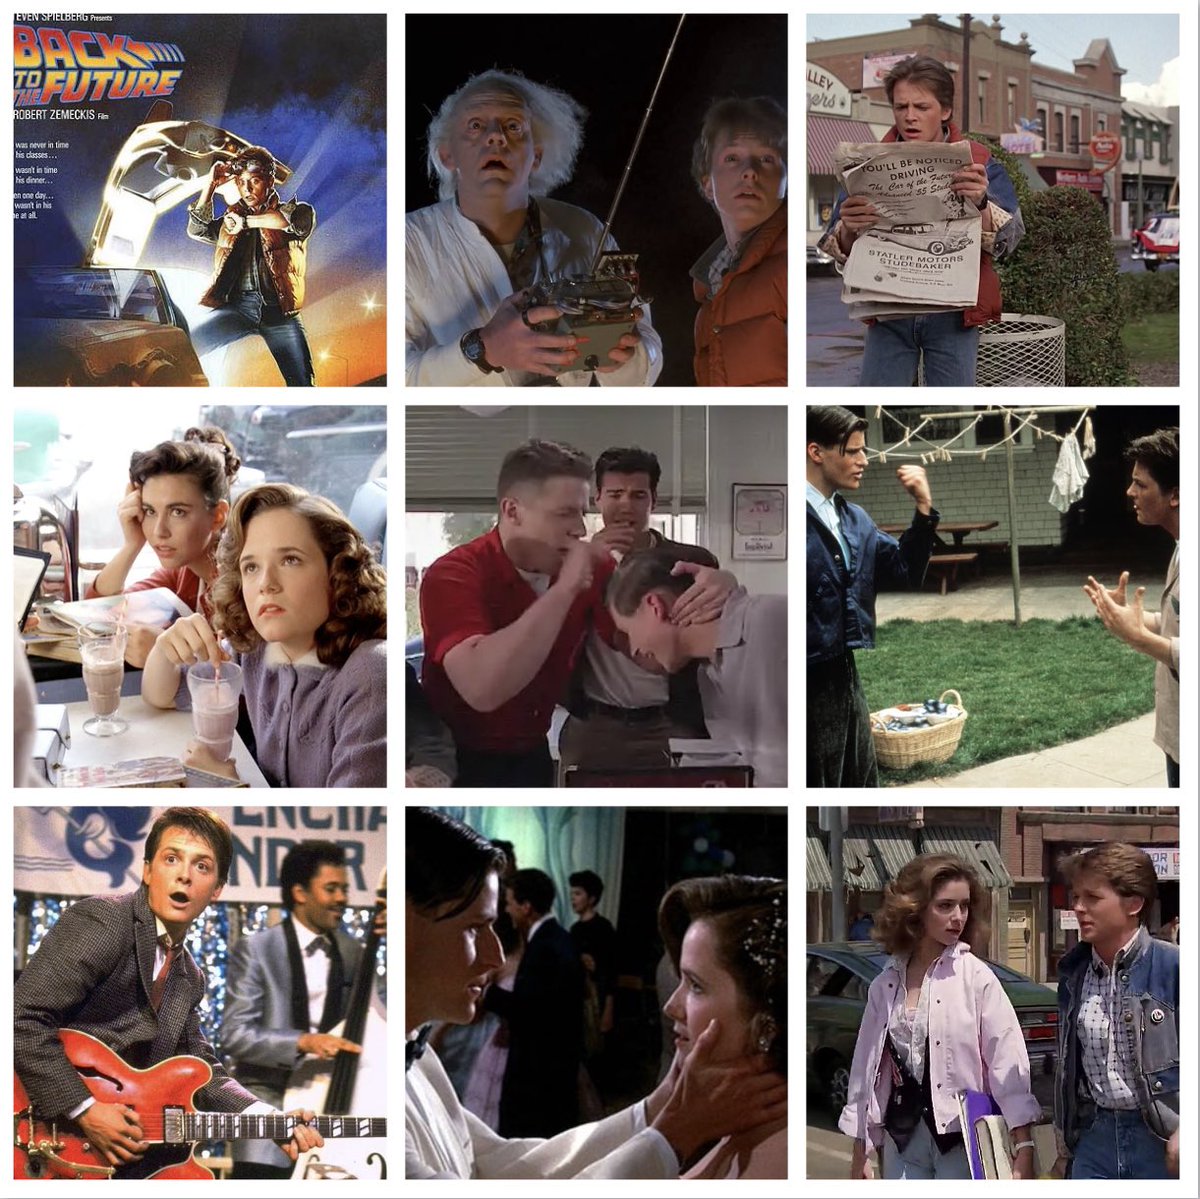 Happy 38th anniversary to Back To The Future released on July 3, 1985
#BackToTheFuture #releasedonthisday 
#MichaelJFox #CrispinGlover 
#ChristopherLloyd #LeaThompson
#ClaudiaWells #ThomasFWilson